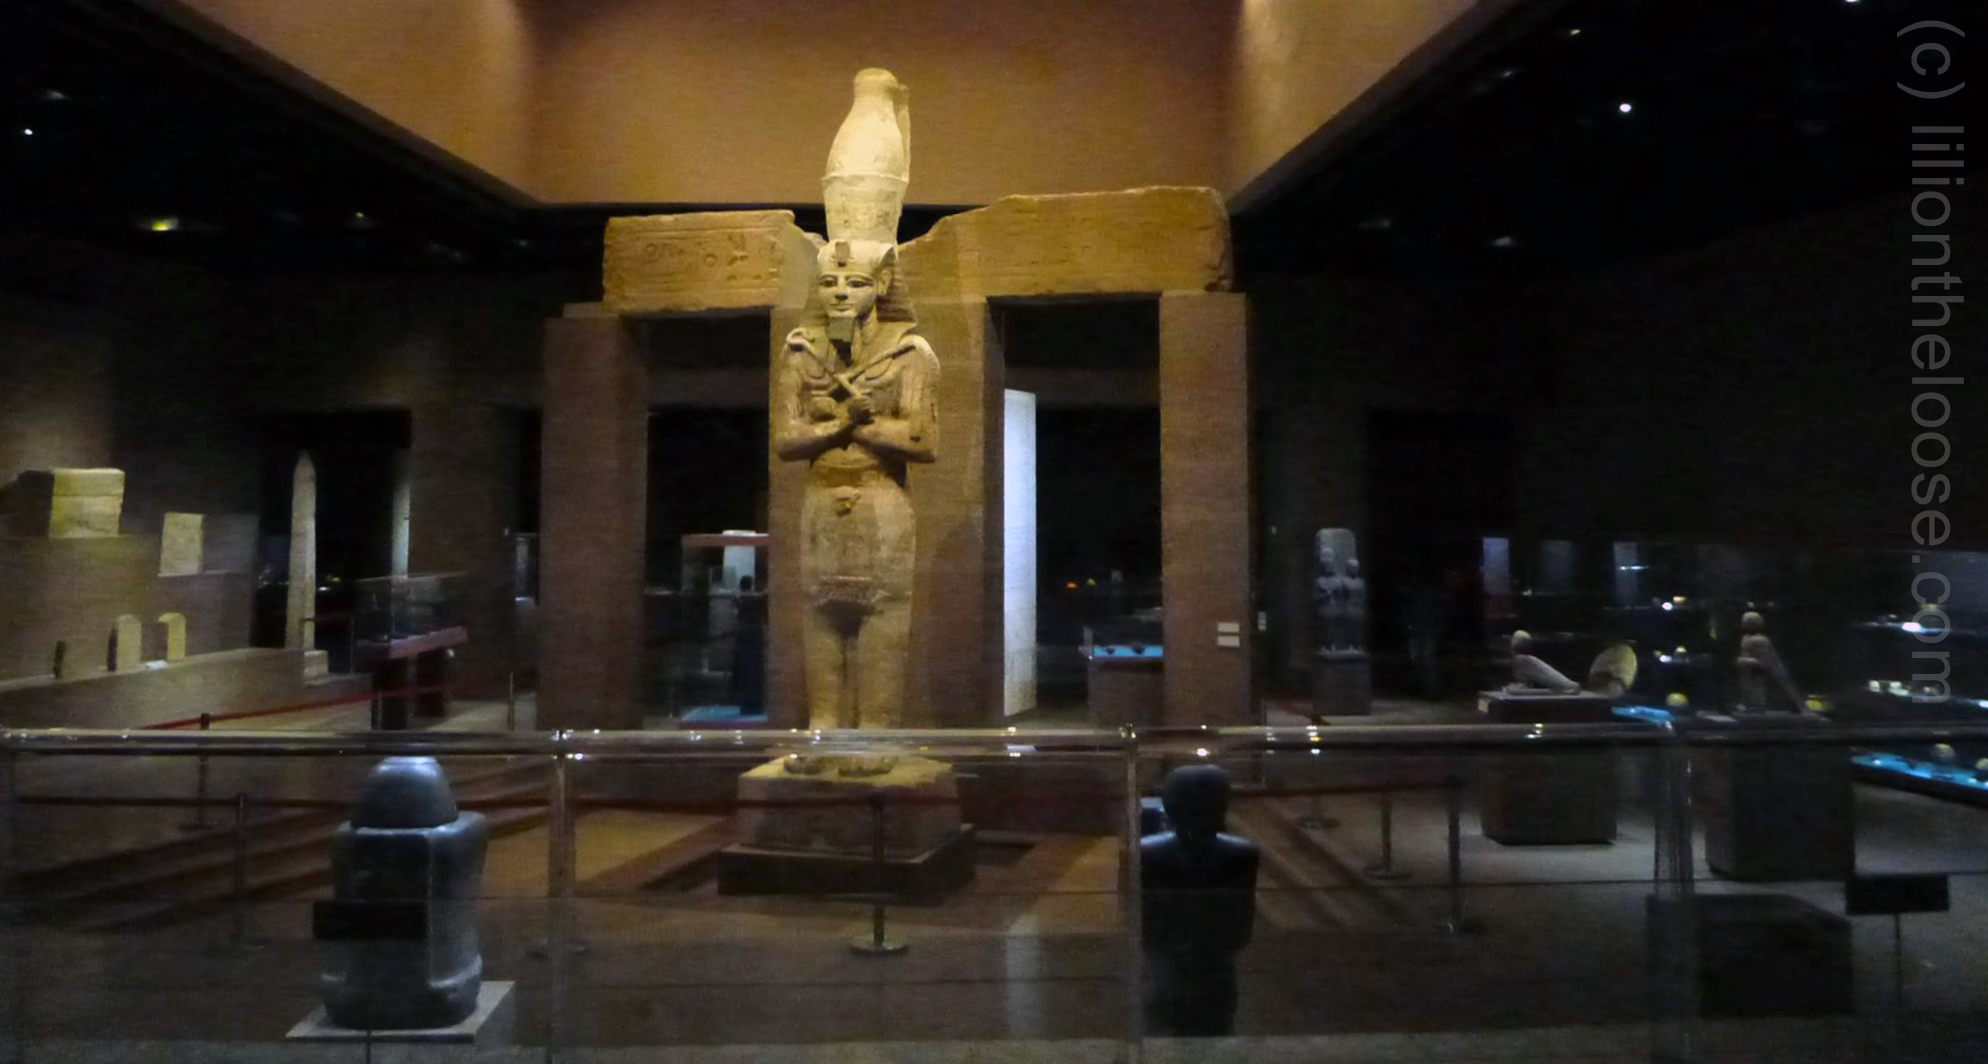 Ramses II statue from the Temple of Gerf Hussein surveys the main exhibition hall.